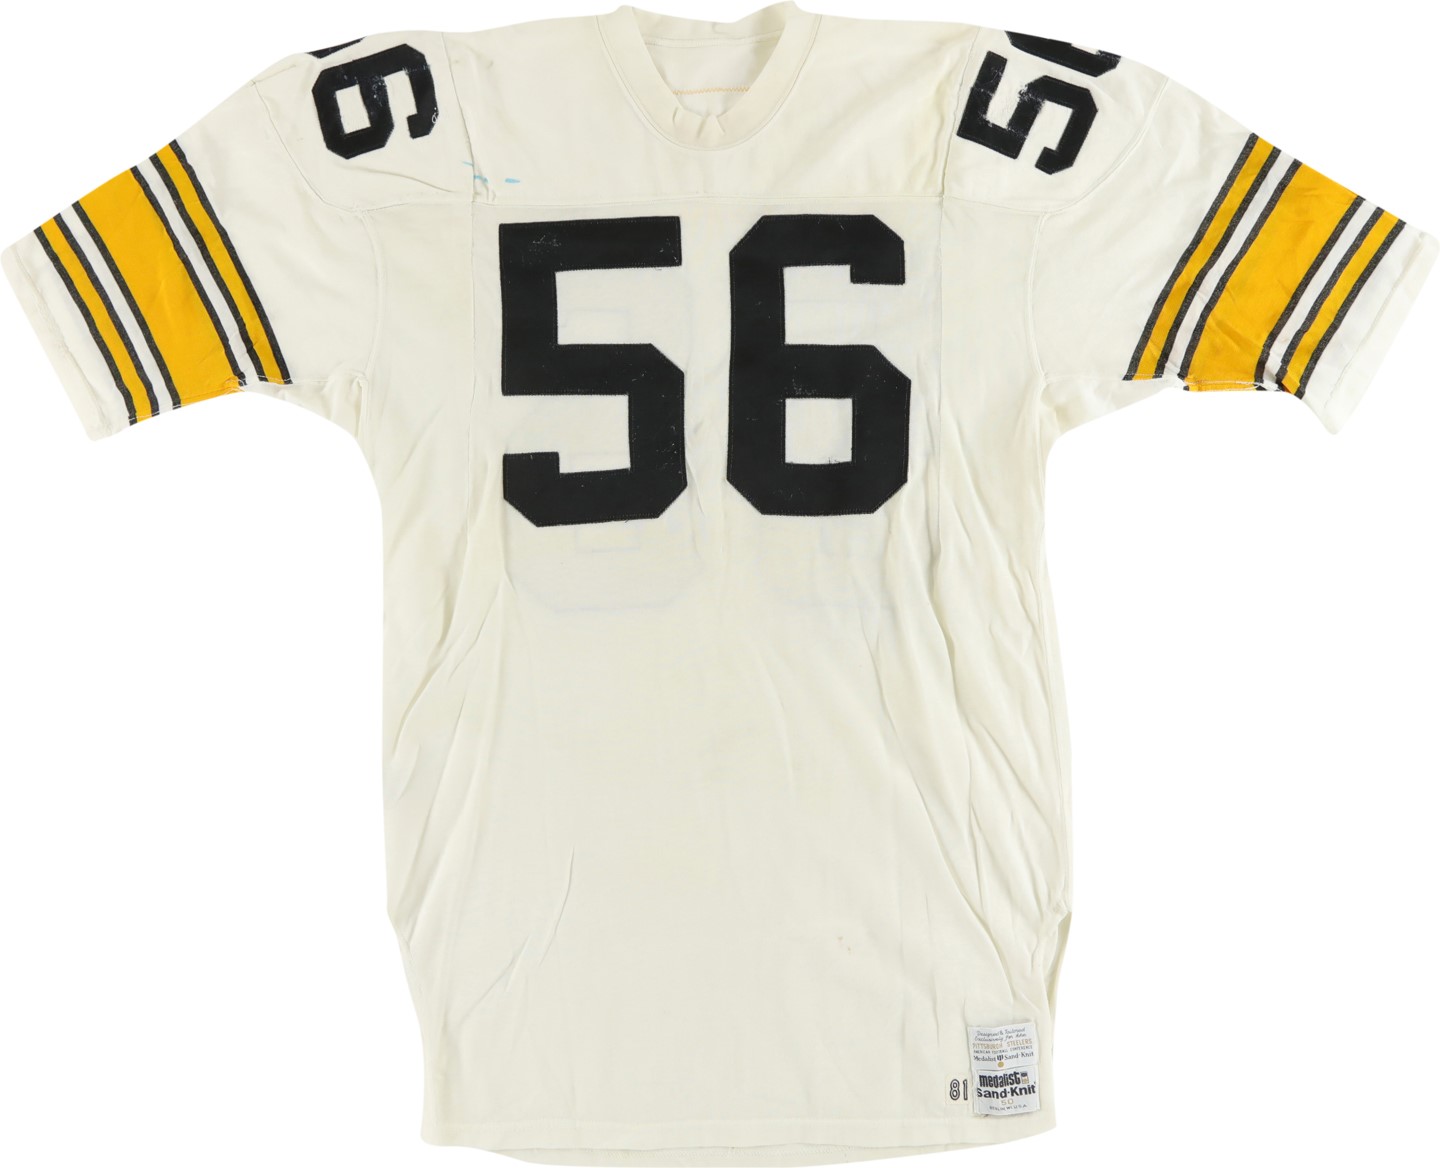 The Pittsburgh Steelers Game Worn Jersey Archive - 1981 Robin Cole Pittsburgh Steelers Game Worn Jersey